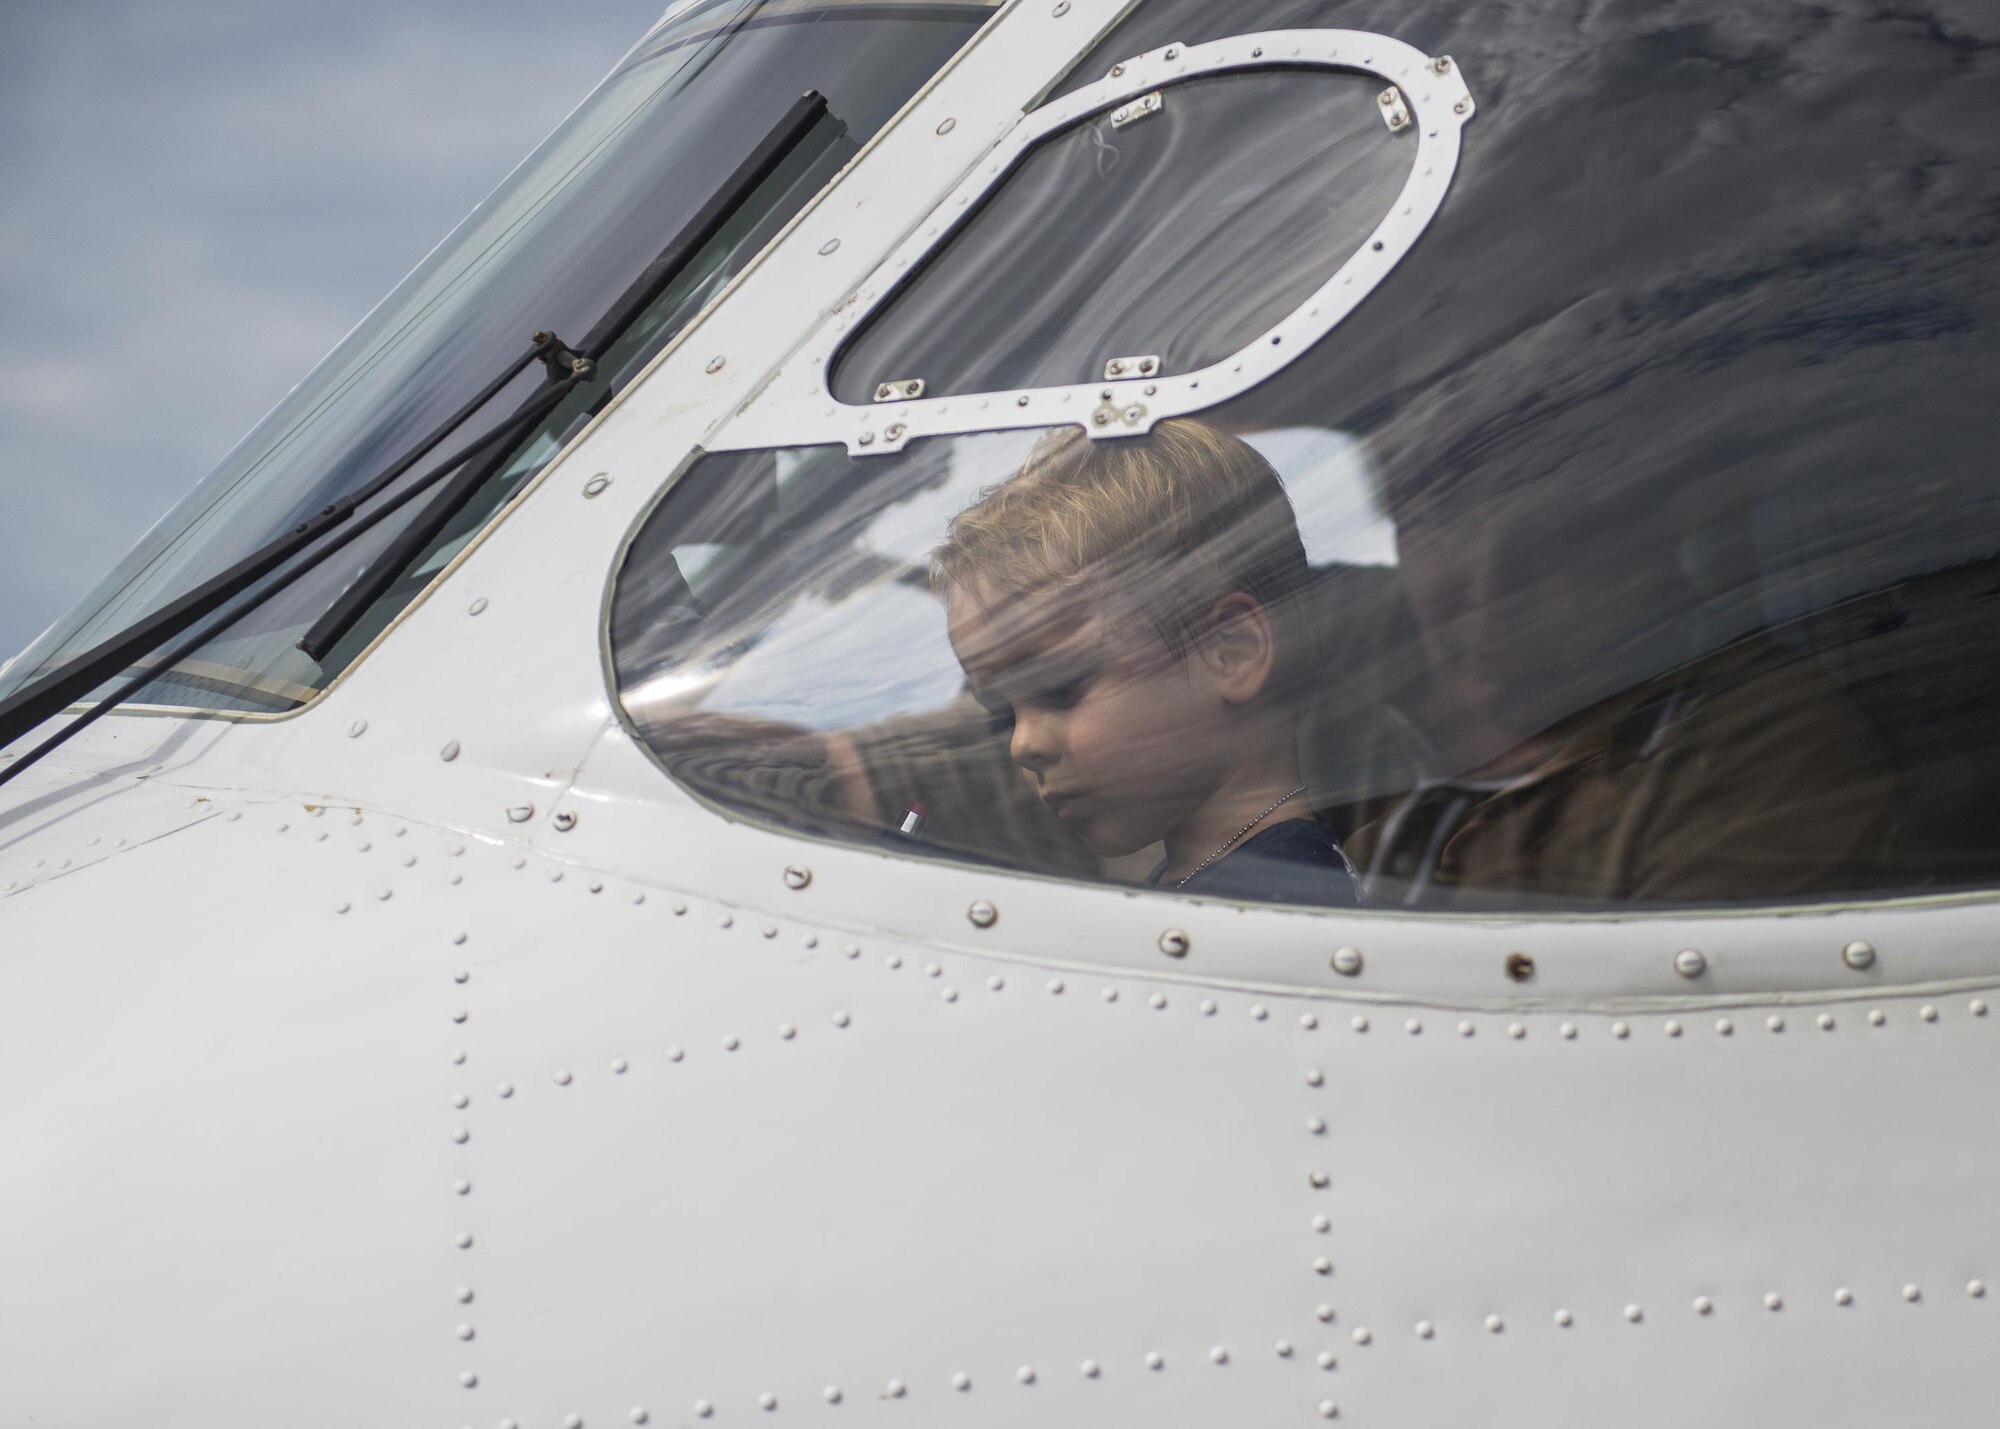 A “Future Airman” simulates flight on a C-145 during the Duke Field Operation Hero event Nov. 7. The event was a mock deployment exercise for 919th Special Operations Wing children. The exercise started with the kids receiving orders before deploying to the 919th Special Operations Logistics Readiness Squadron building. The “little deployers” were issued fake military ID cards, dog tags, and immunizations. (U.S. Air Force photo/ Tech. Sgt. Jasmin Taylor)